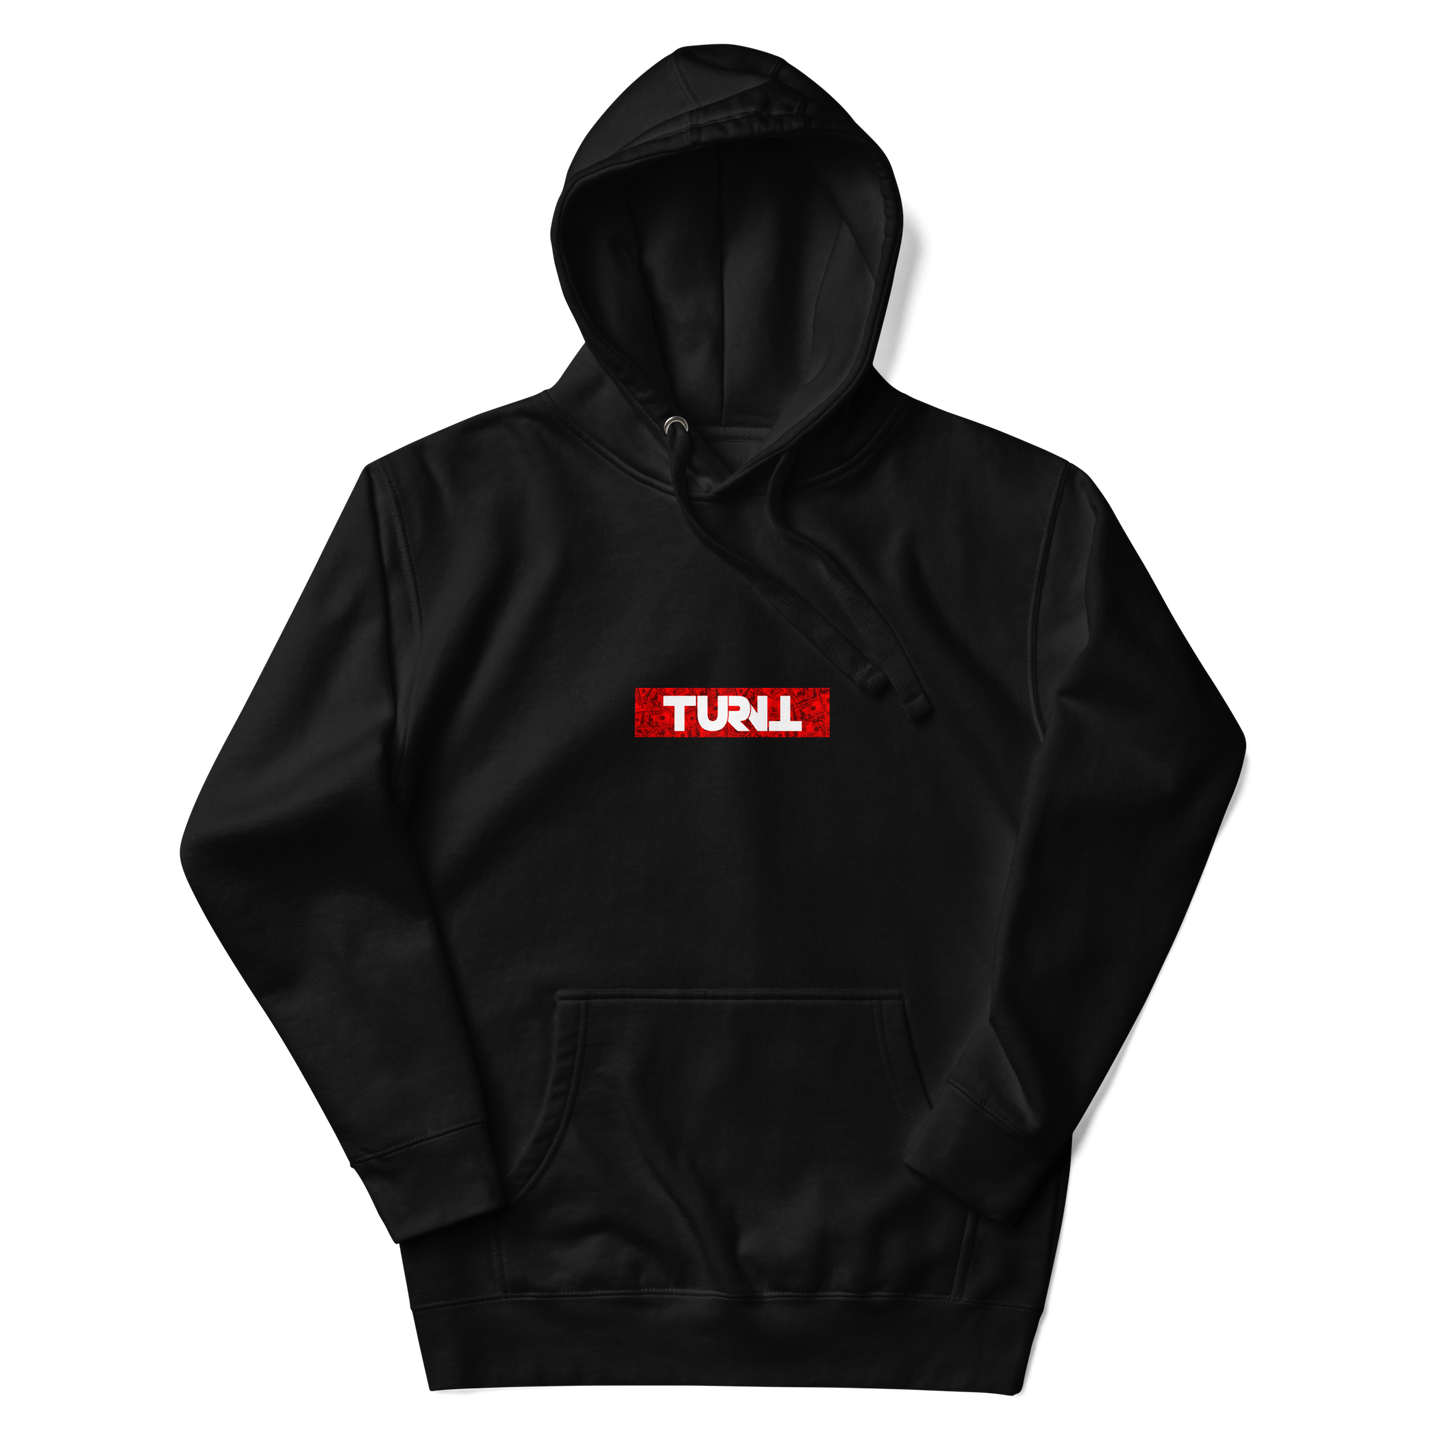 Turnt box logo hoodie (Red edition)